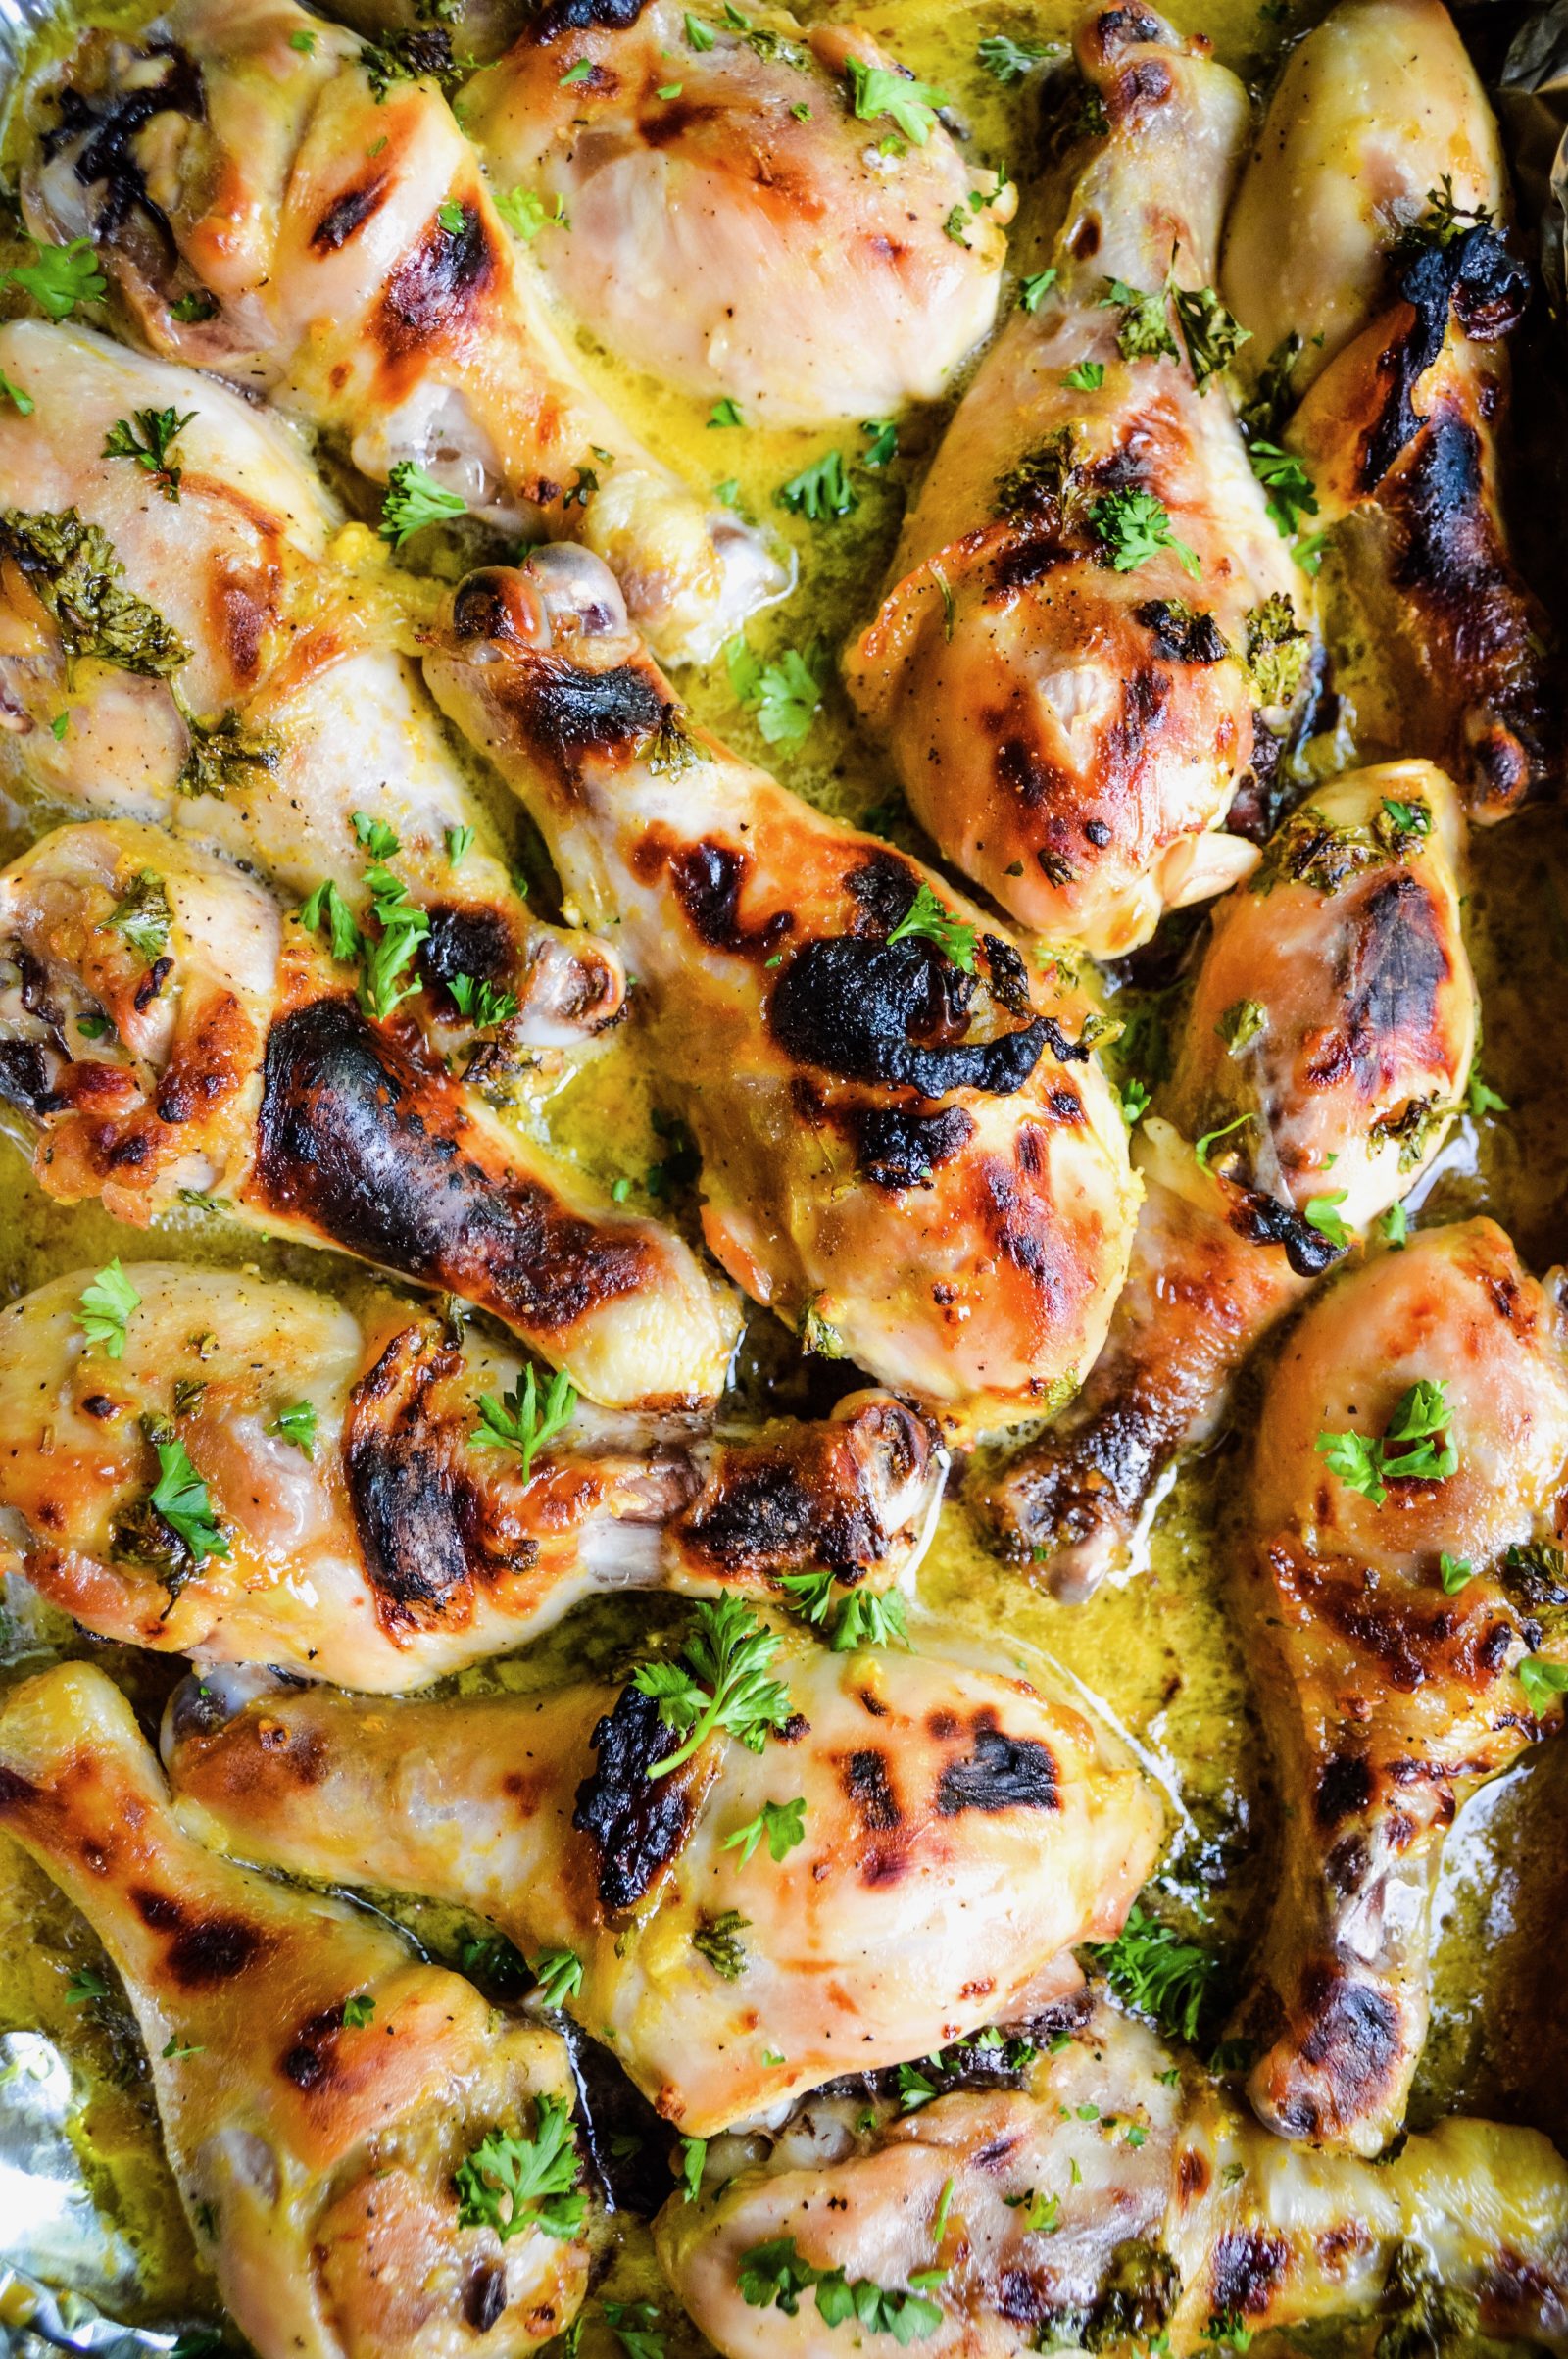 Perfectly Baked Chicken Drumsticks with Amazing Marinade!